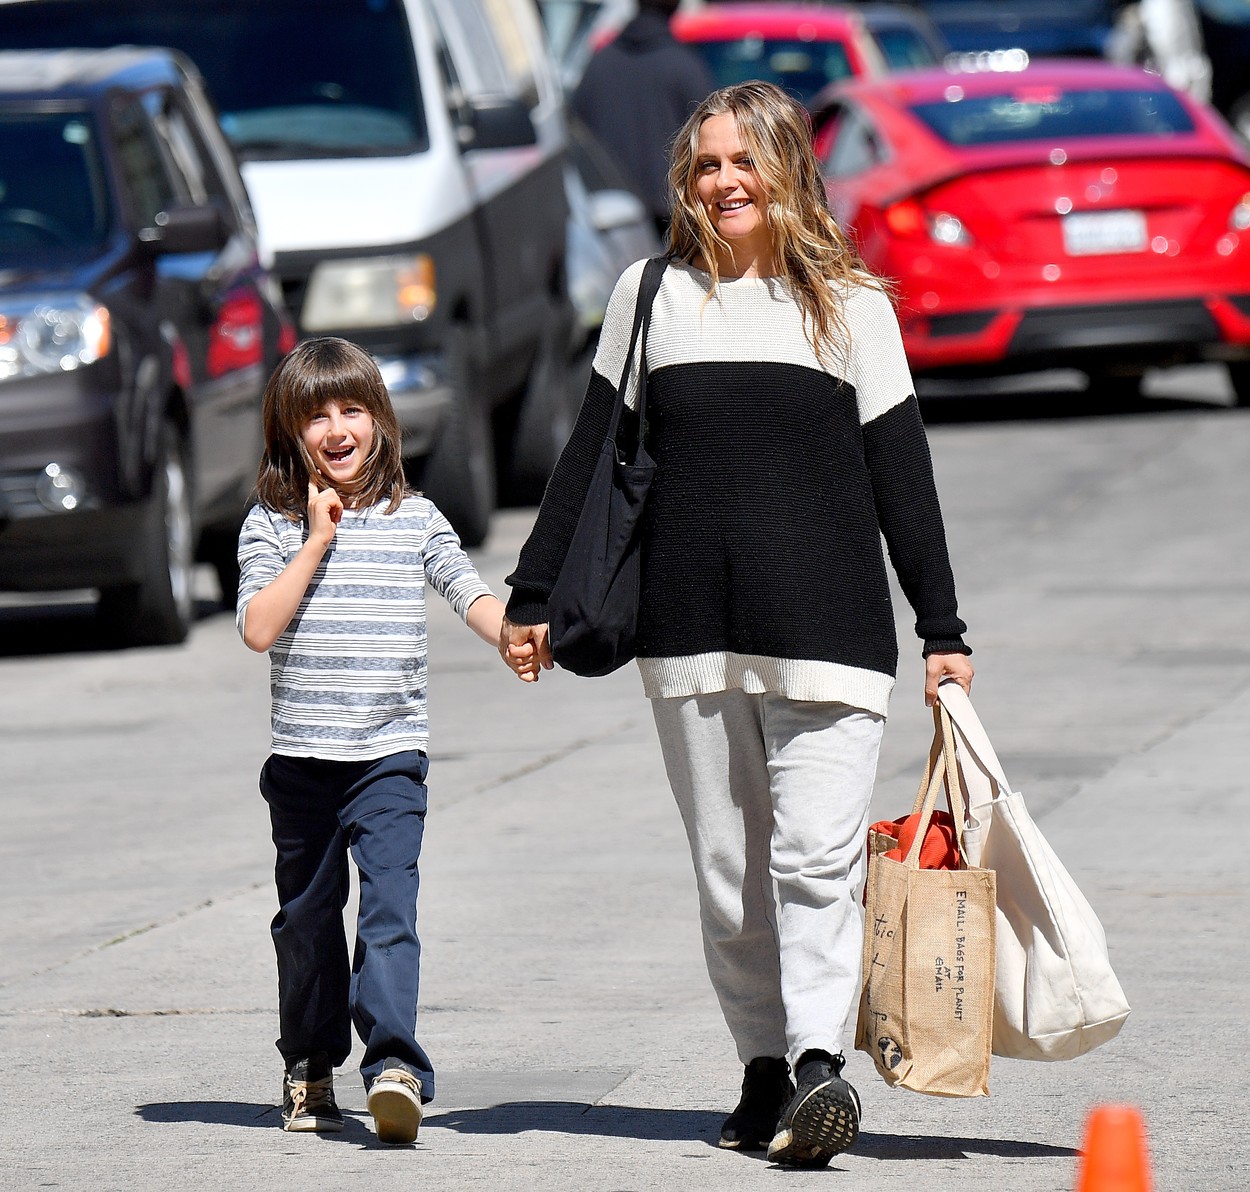 EXCLUSIVE: Newly Single Alicia Silverstone puts on a brave face as she and her son Bear spend some time at a farmer's market in Los Angeles. Alicia, who just announced she and her husband of 13 years had split. She put smile on her face though, as she walked hand in hand with her 6 year old son Bear. They picked fresh produce and were seen sitting and eating food with friends.
04 Mar 2018,Image: 365287154, License: Rights-managed, Restrictions: World Rights, Model Release: no